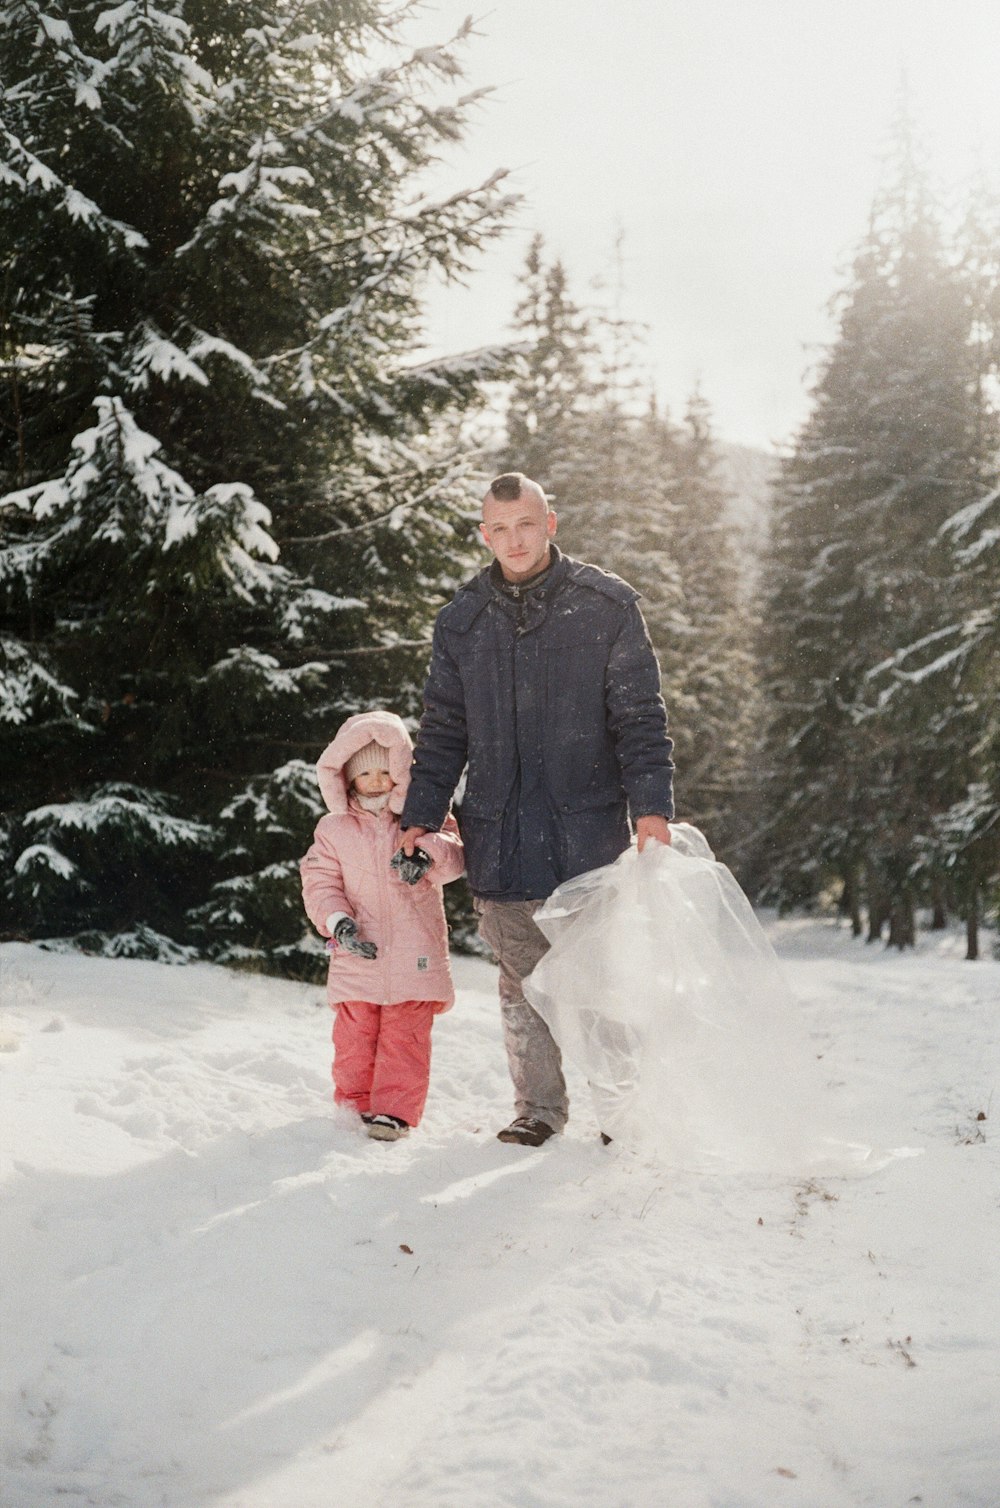 man in black jacket holding girl in pink coat on snow covered ground during daytime